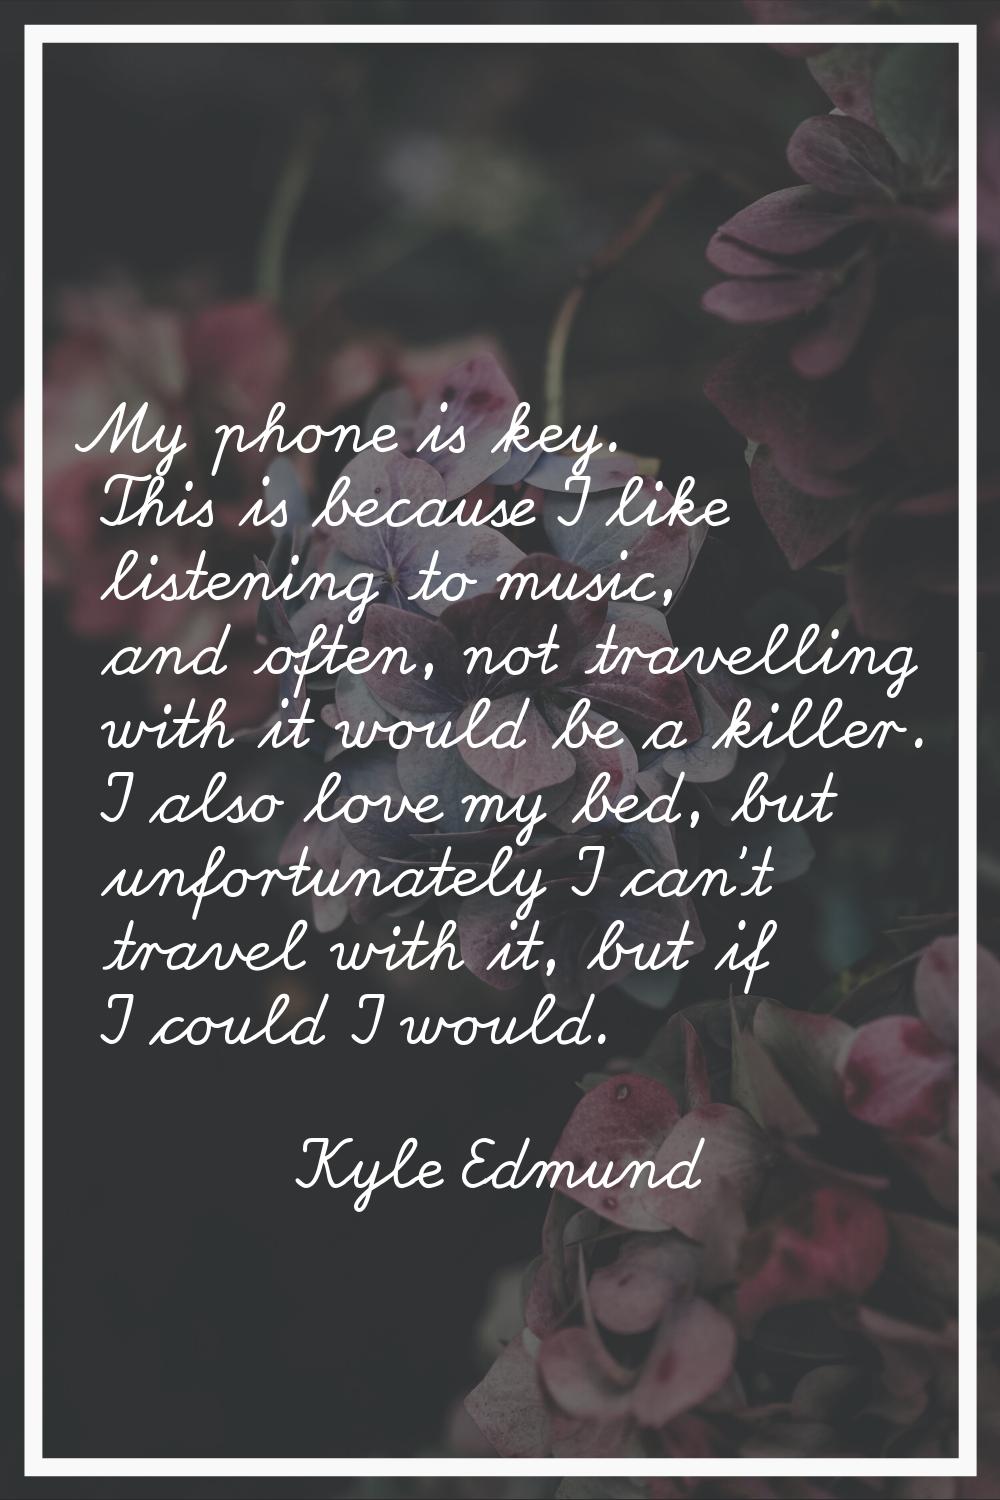 My phone is key. This is because I like listening to music, and often, not travelling with it would